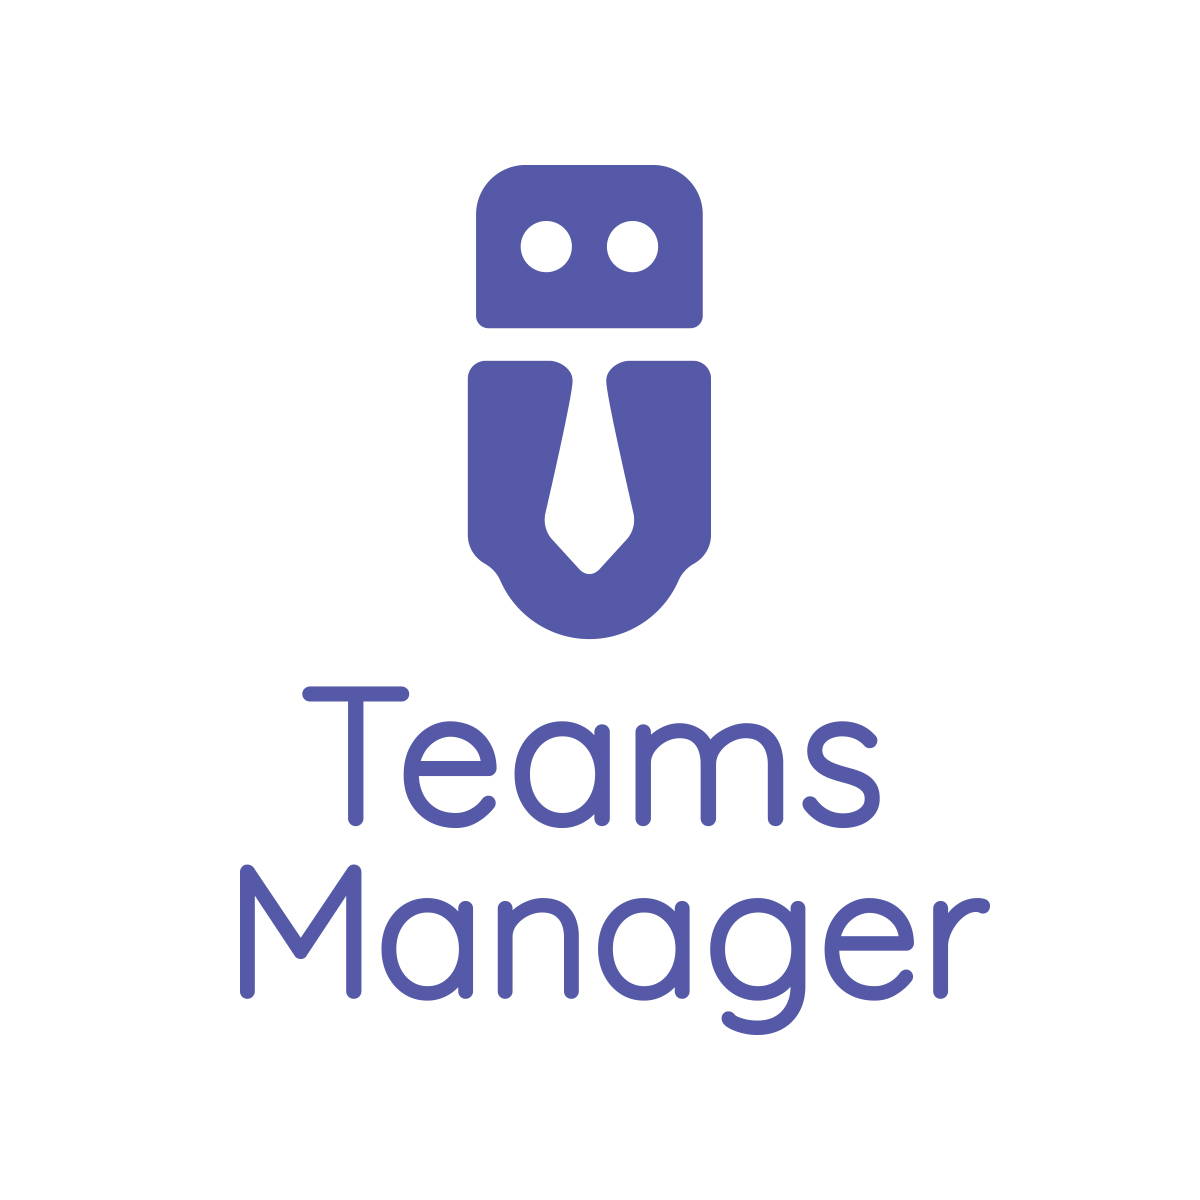 What is Microsoft Teams? - Solutions2Share